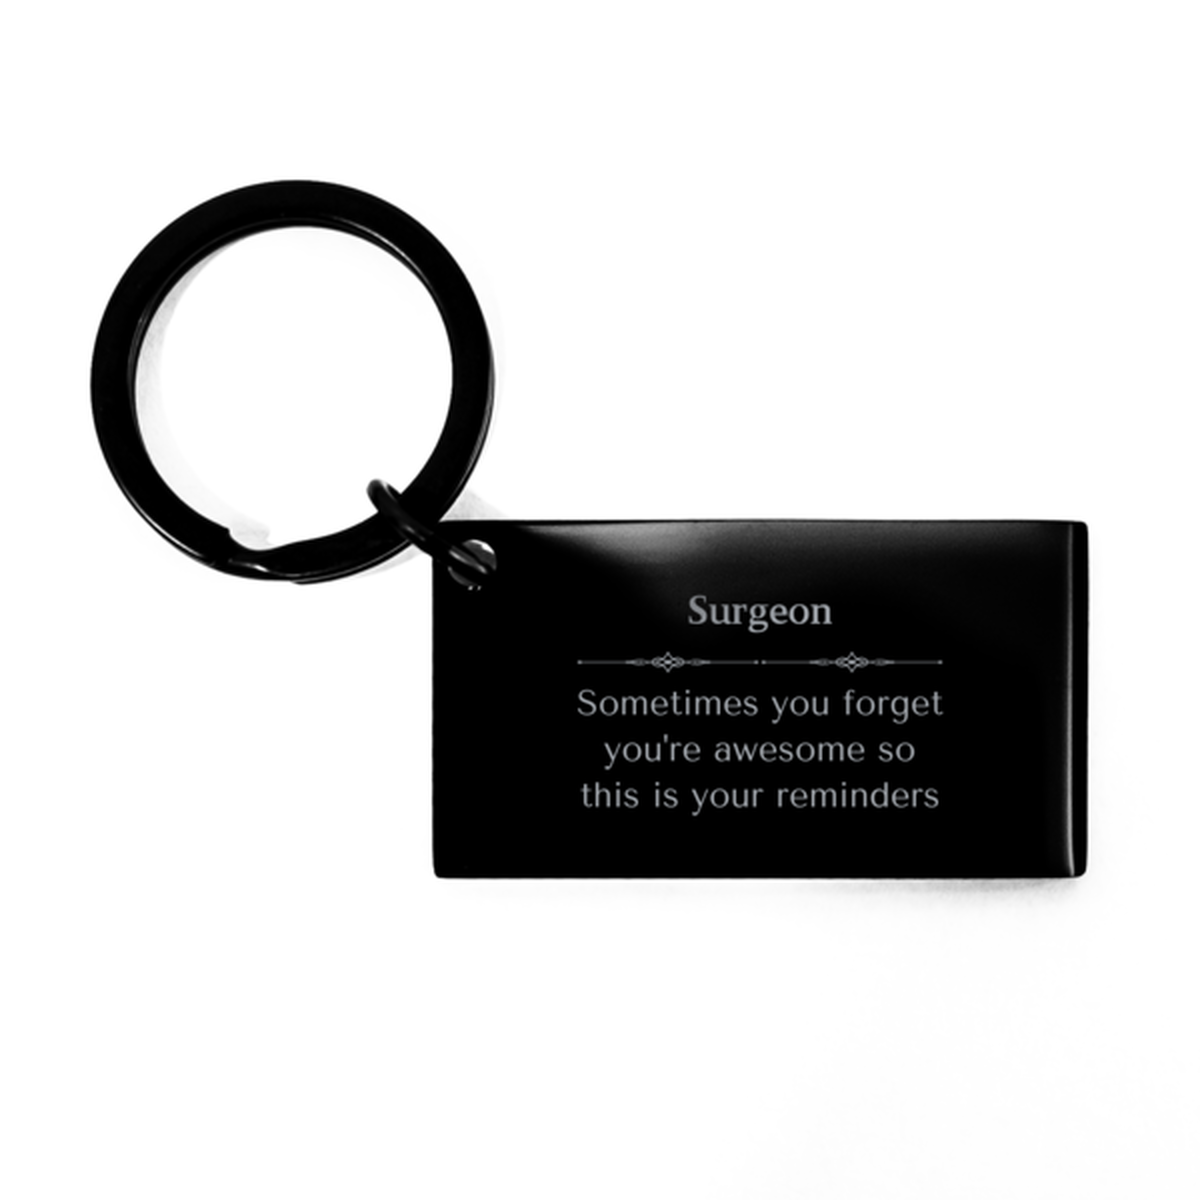 Sentimental Surgeon Keychain, Web Developer Sometimes you forget you're awesome so this is your reminders, Graduation Christmas Birthday Gifts for Surgeon, Men, Women, Coworkers